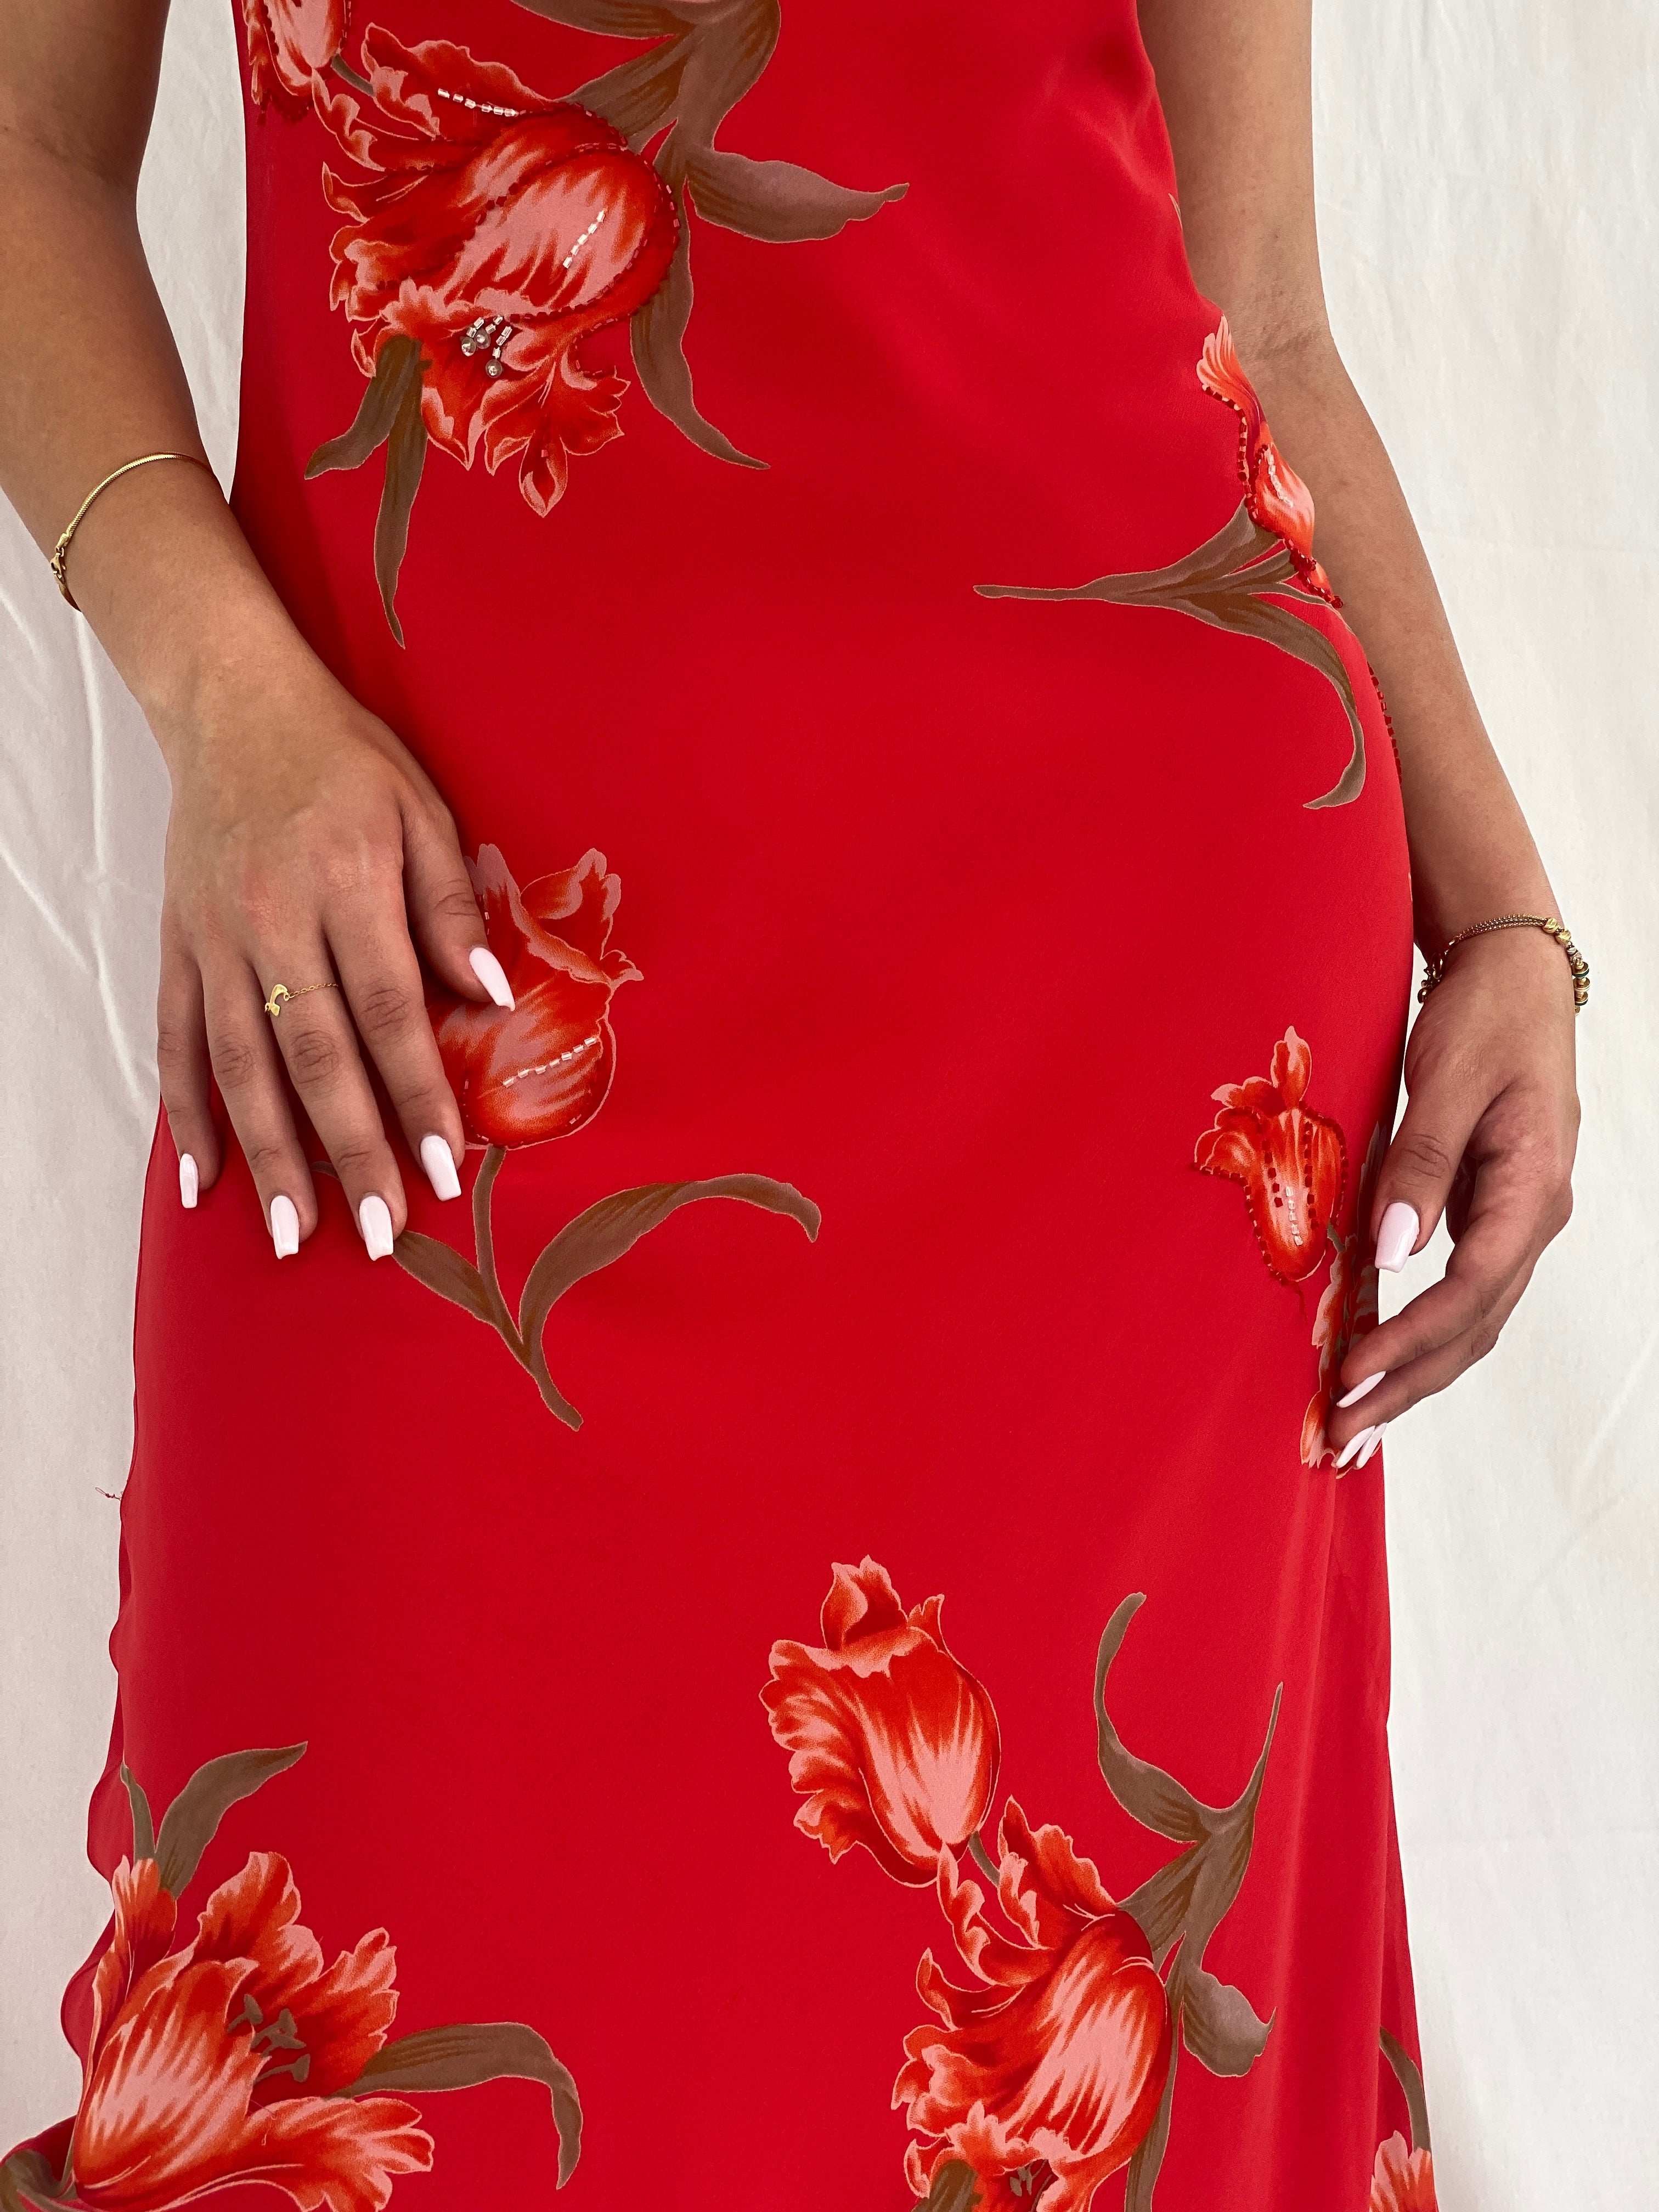 Vintage Jessica Howard Red Floral Maxi Dress Size M - Balagan Vintage Maxi Dress 90s, 90s dress, floral dress, maxi dress, NEW IN, Rama, Wedding Guest